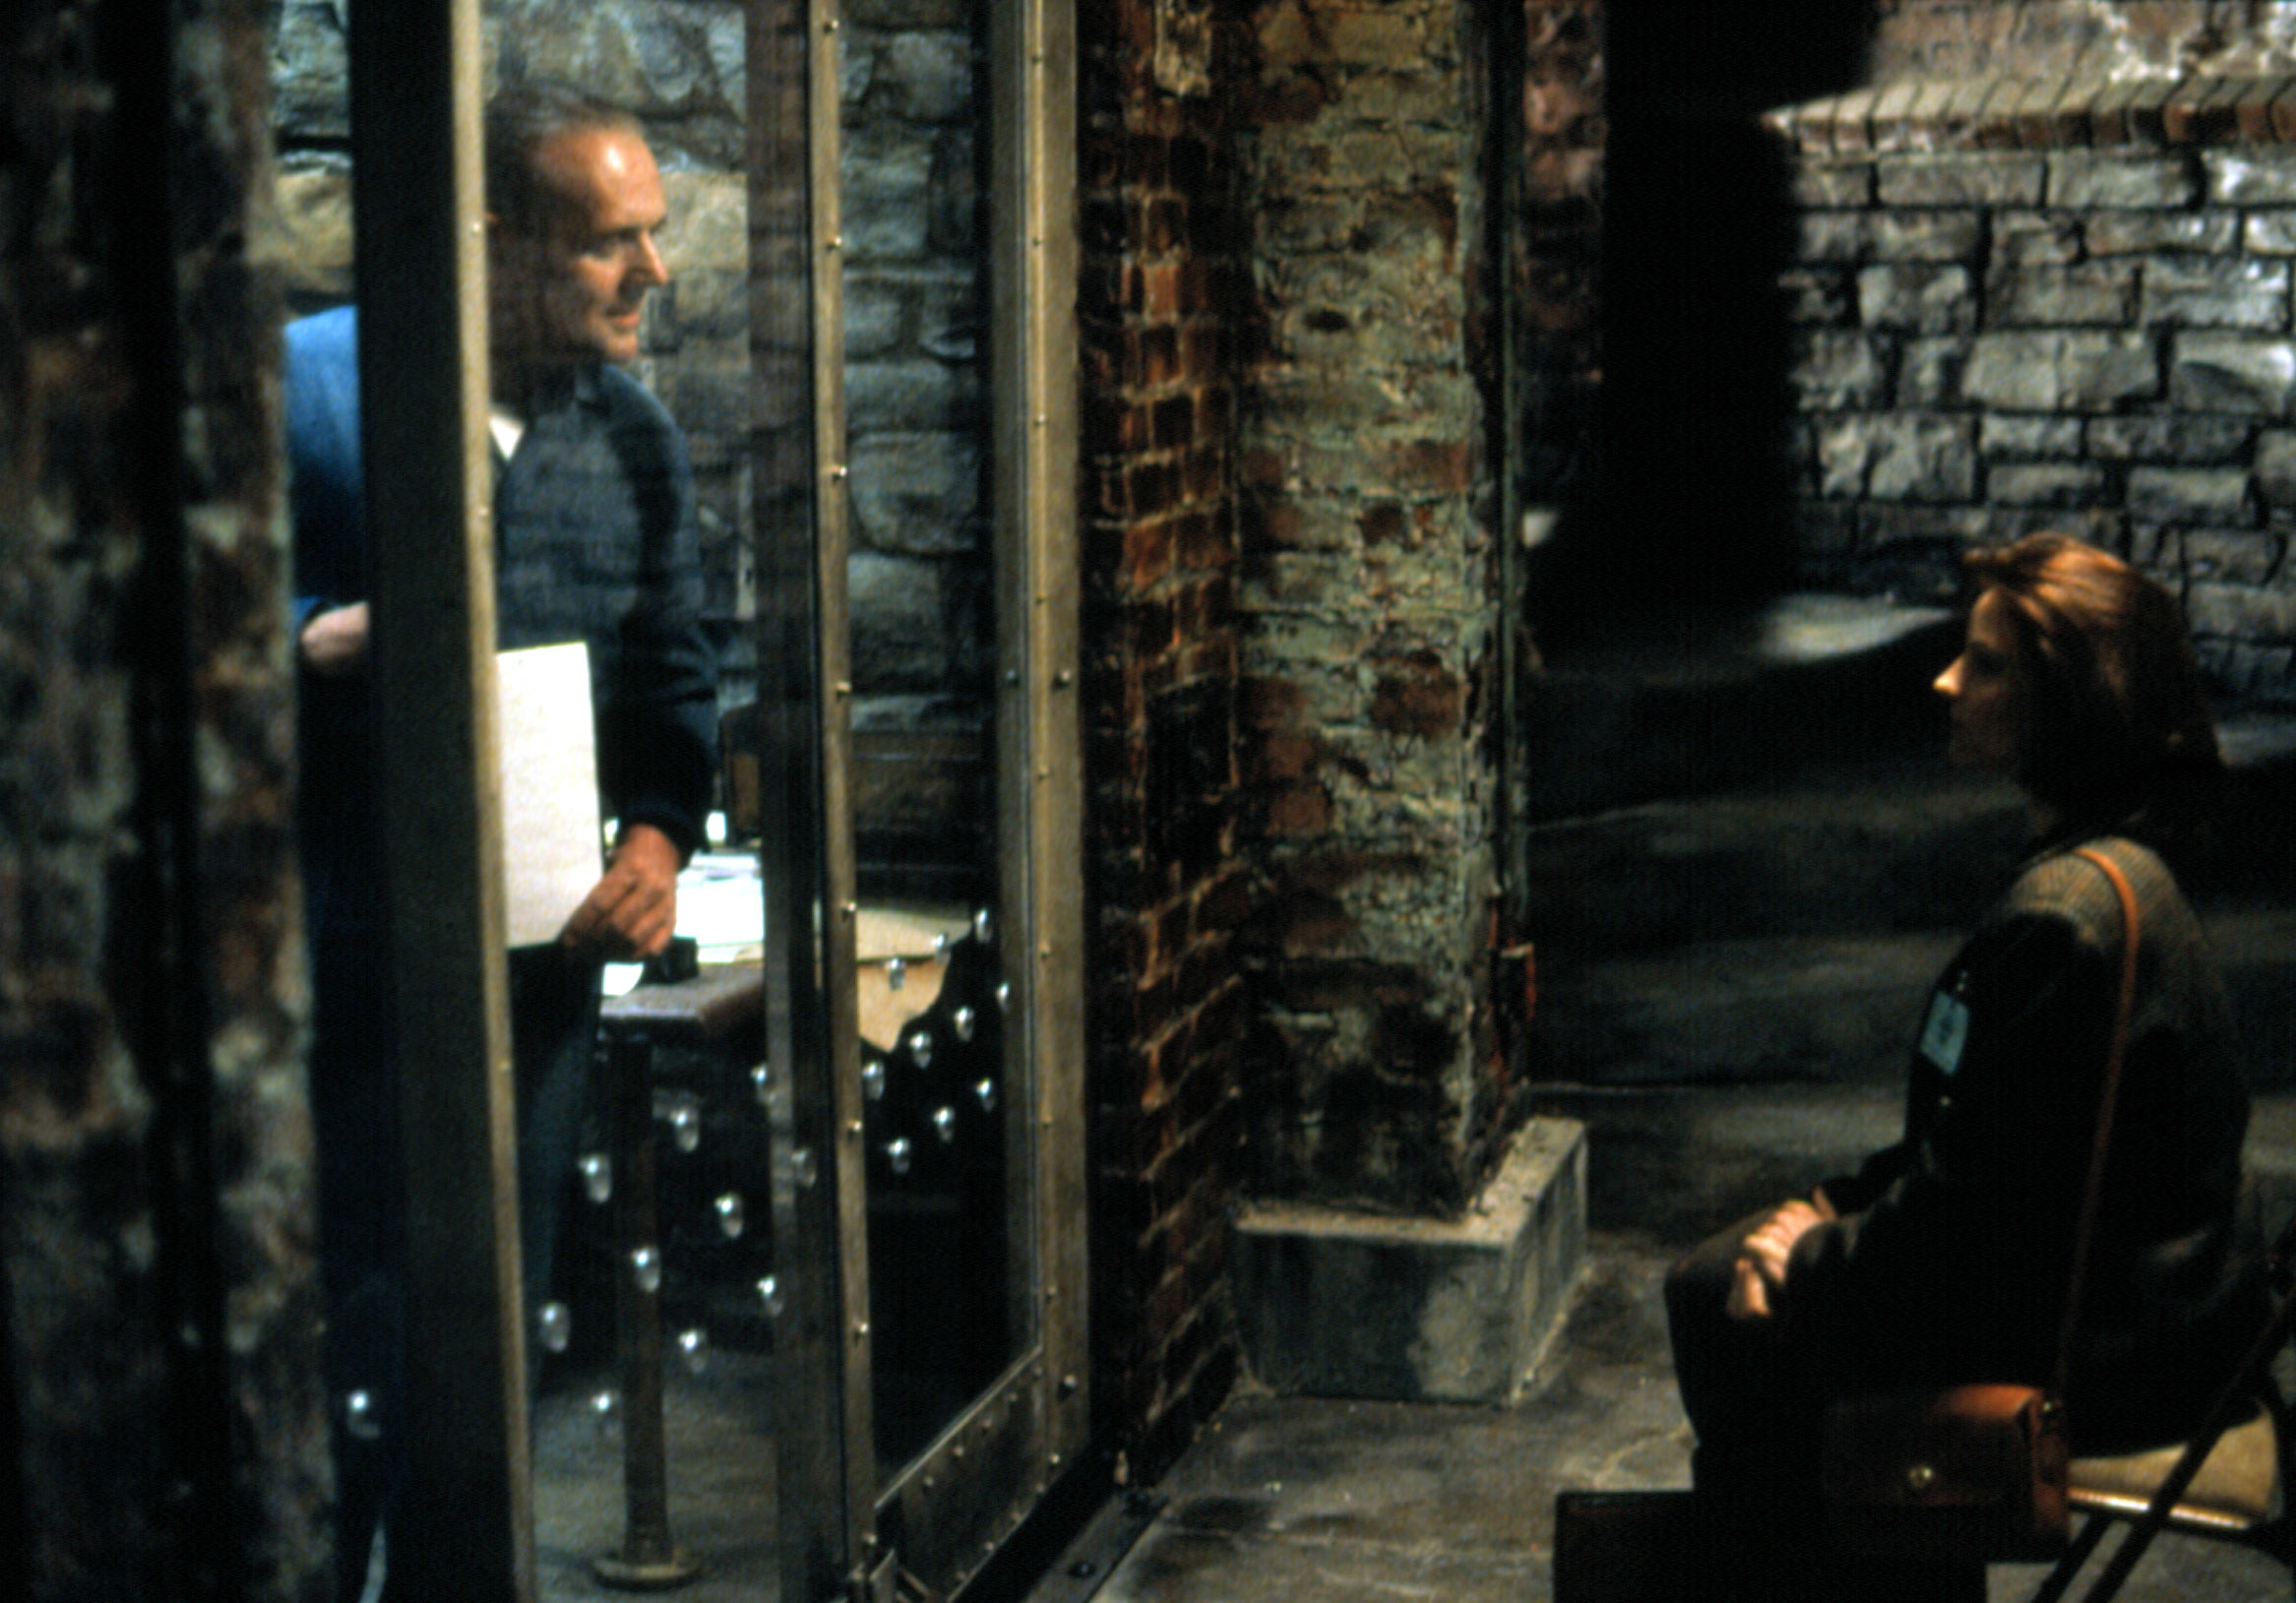 Hannibal Lecter speaks to Clarice Starling through glass in a scene from &quot;The Silence of the Lambs.&quot;